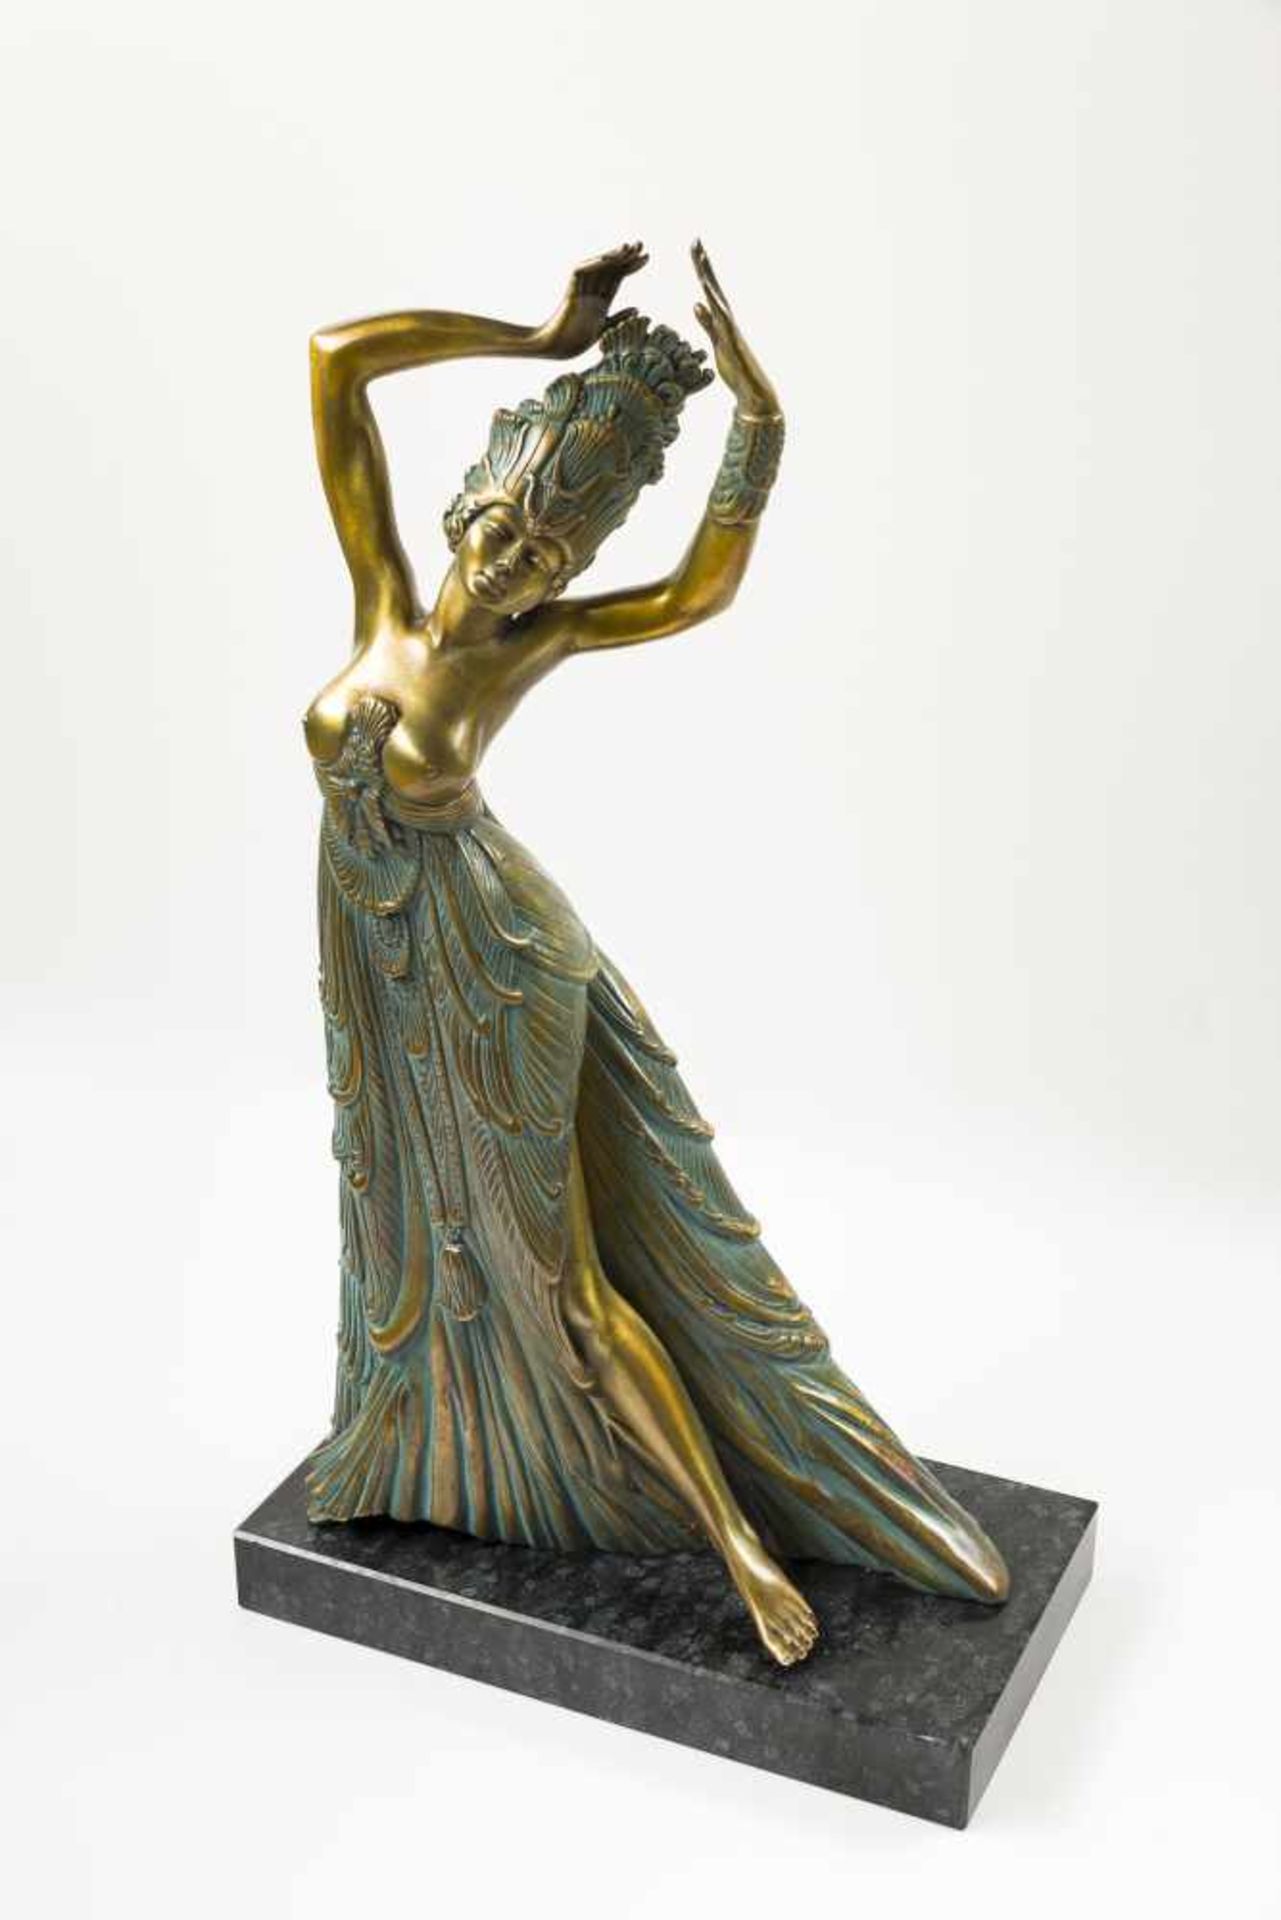 Fuchs, ErnstThe Dance of SalomeBronze sculpture on granite pedestalMiddle right signed and dated16,9